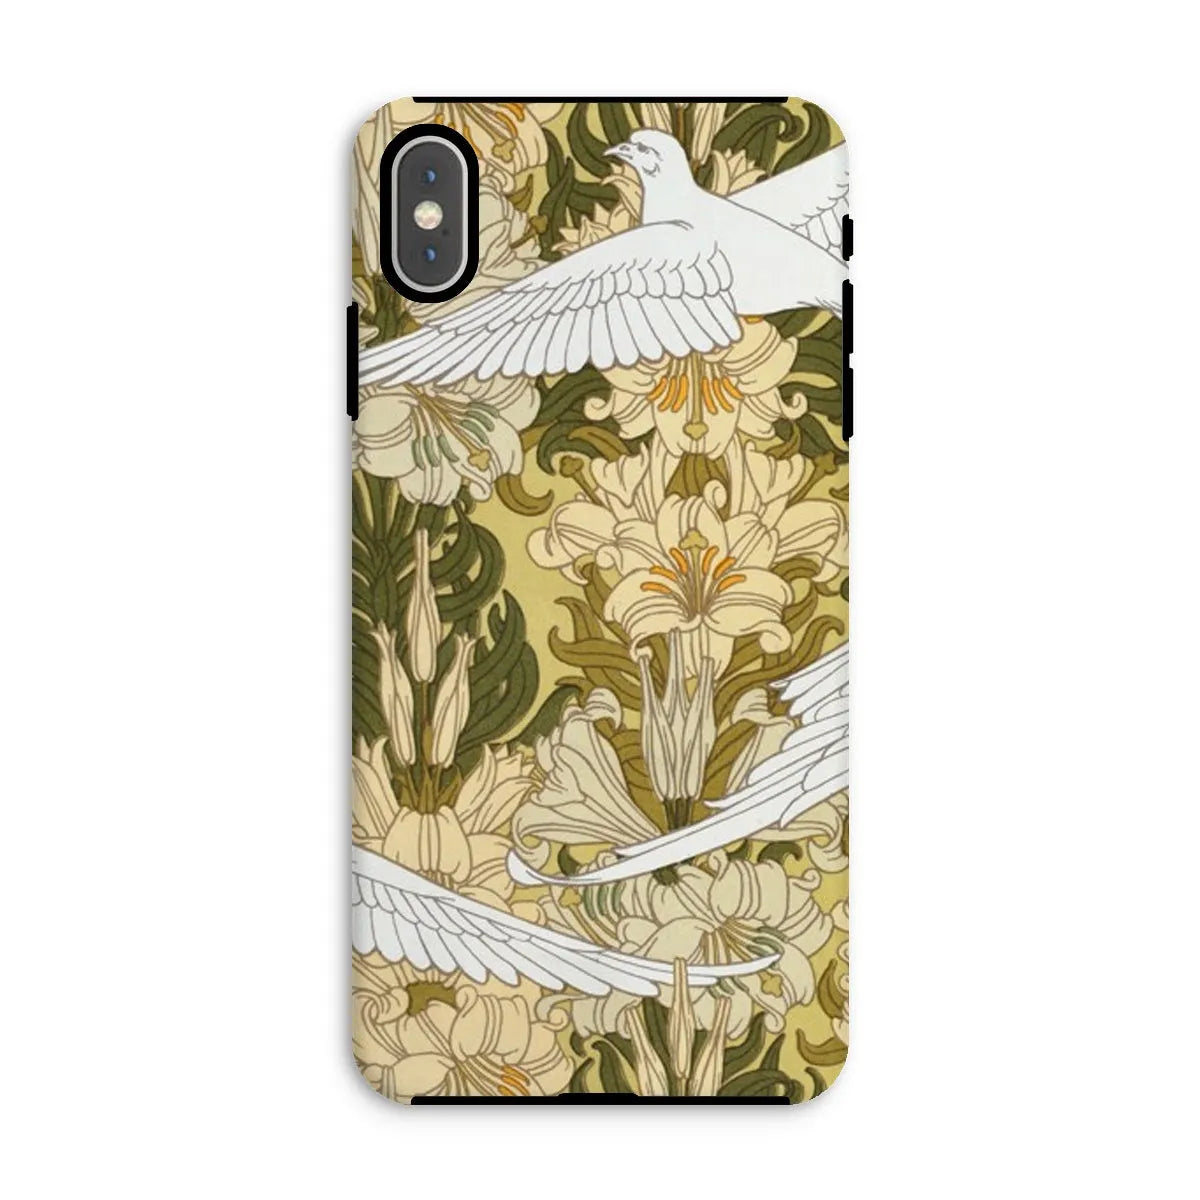 Colombes Et Lis Bird Art Phone Case - Maurice Pillard Verneuil - Iphone Xs Max / Matte - Mobile Phone Cases - Aesthetic